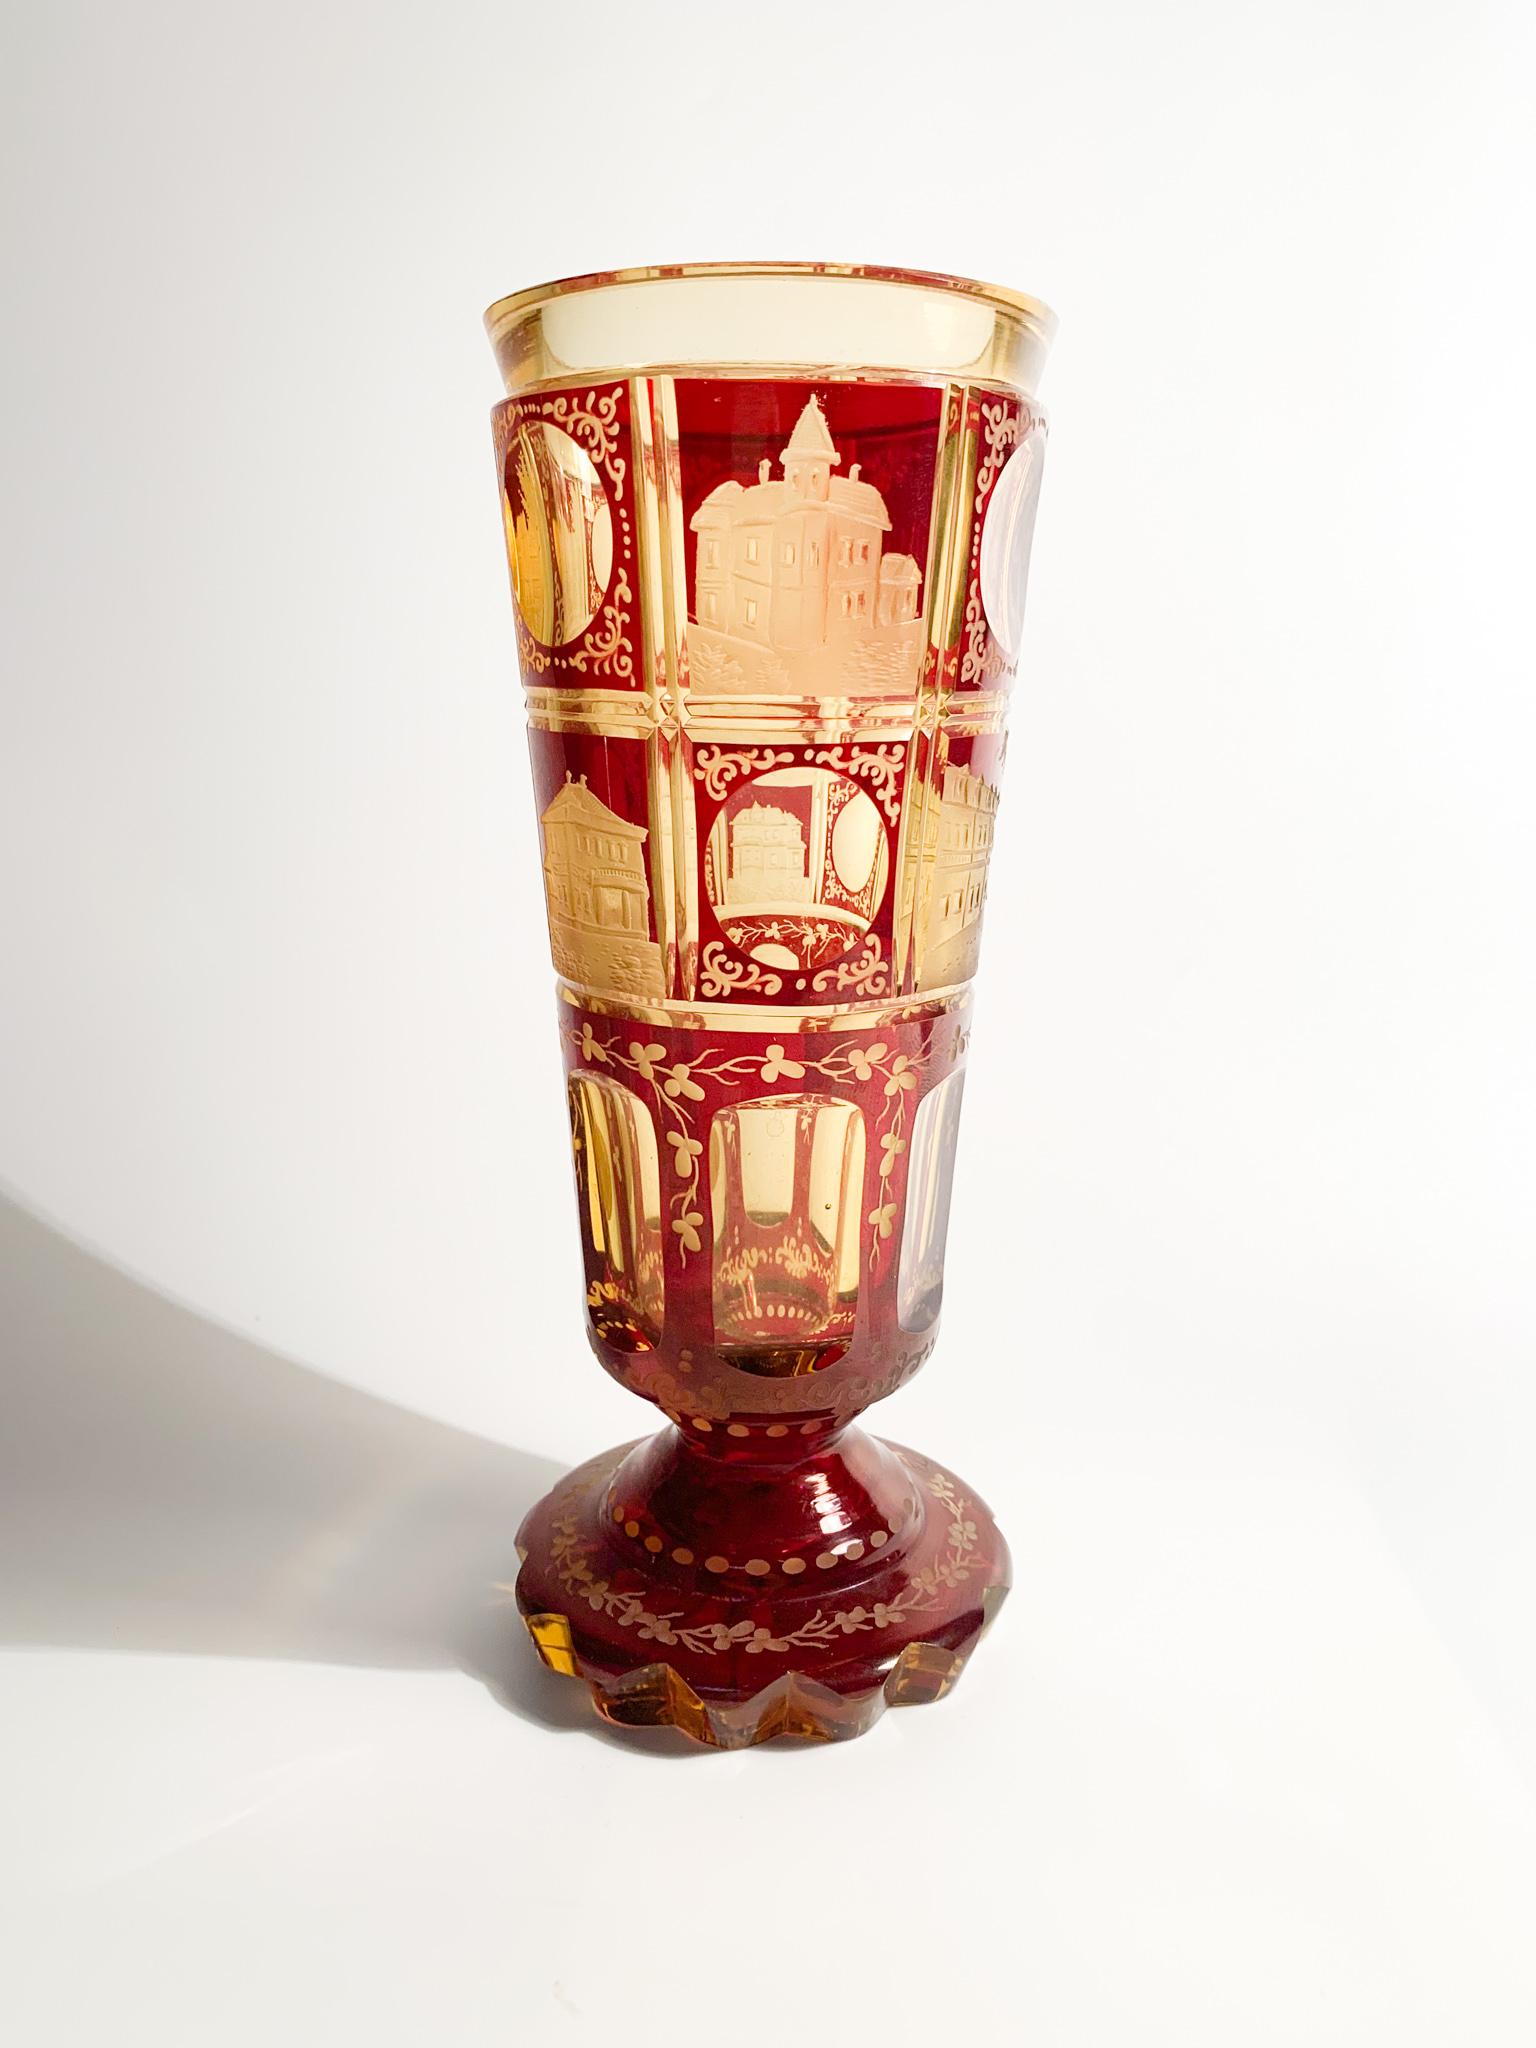 Glass in yellow and red Biedermeier crystal, decorated with acid and made in 1800

Measures: Ø cm 7,5 H cm 19

Biedermeier is was an artistic movement that developed between 1815 and 1848. The term initially spread as a pejorative. Composed of